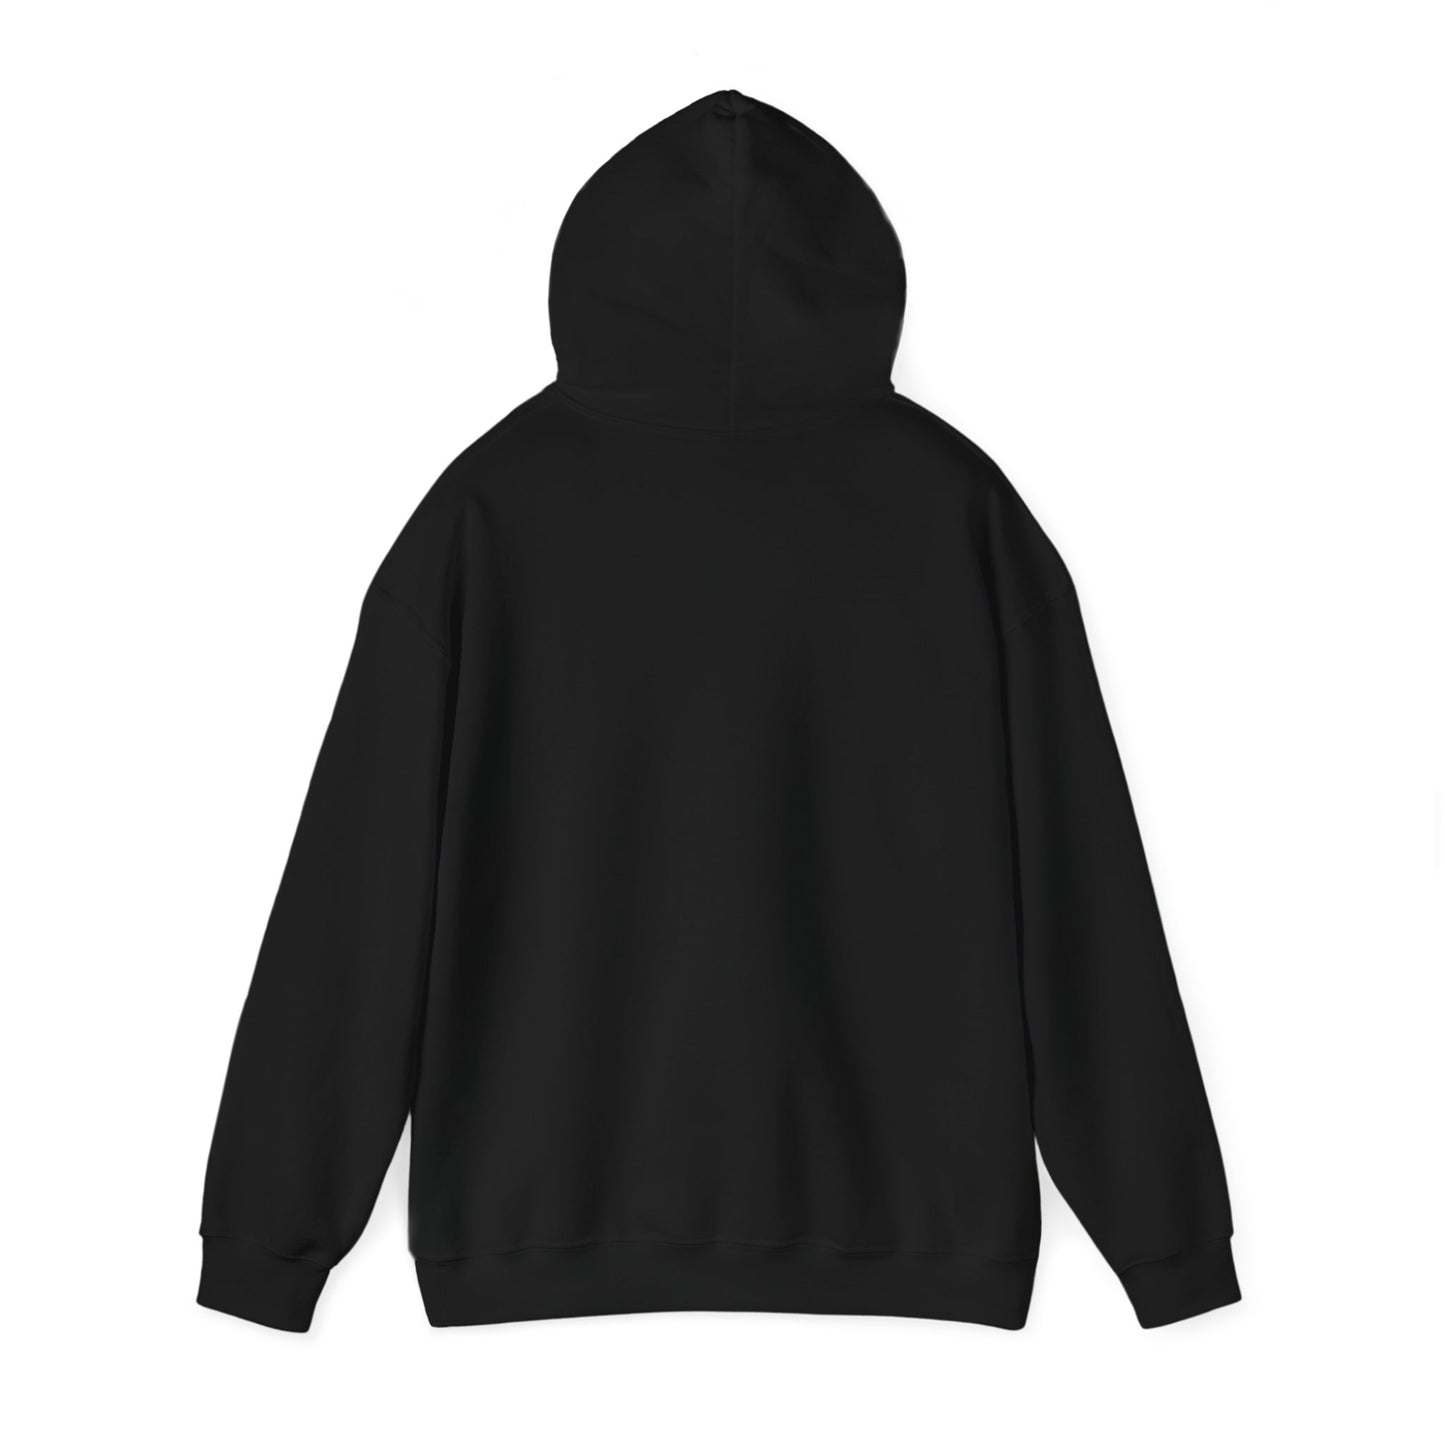 She Nanny Gan Manager Hoodie